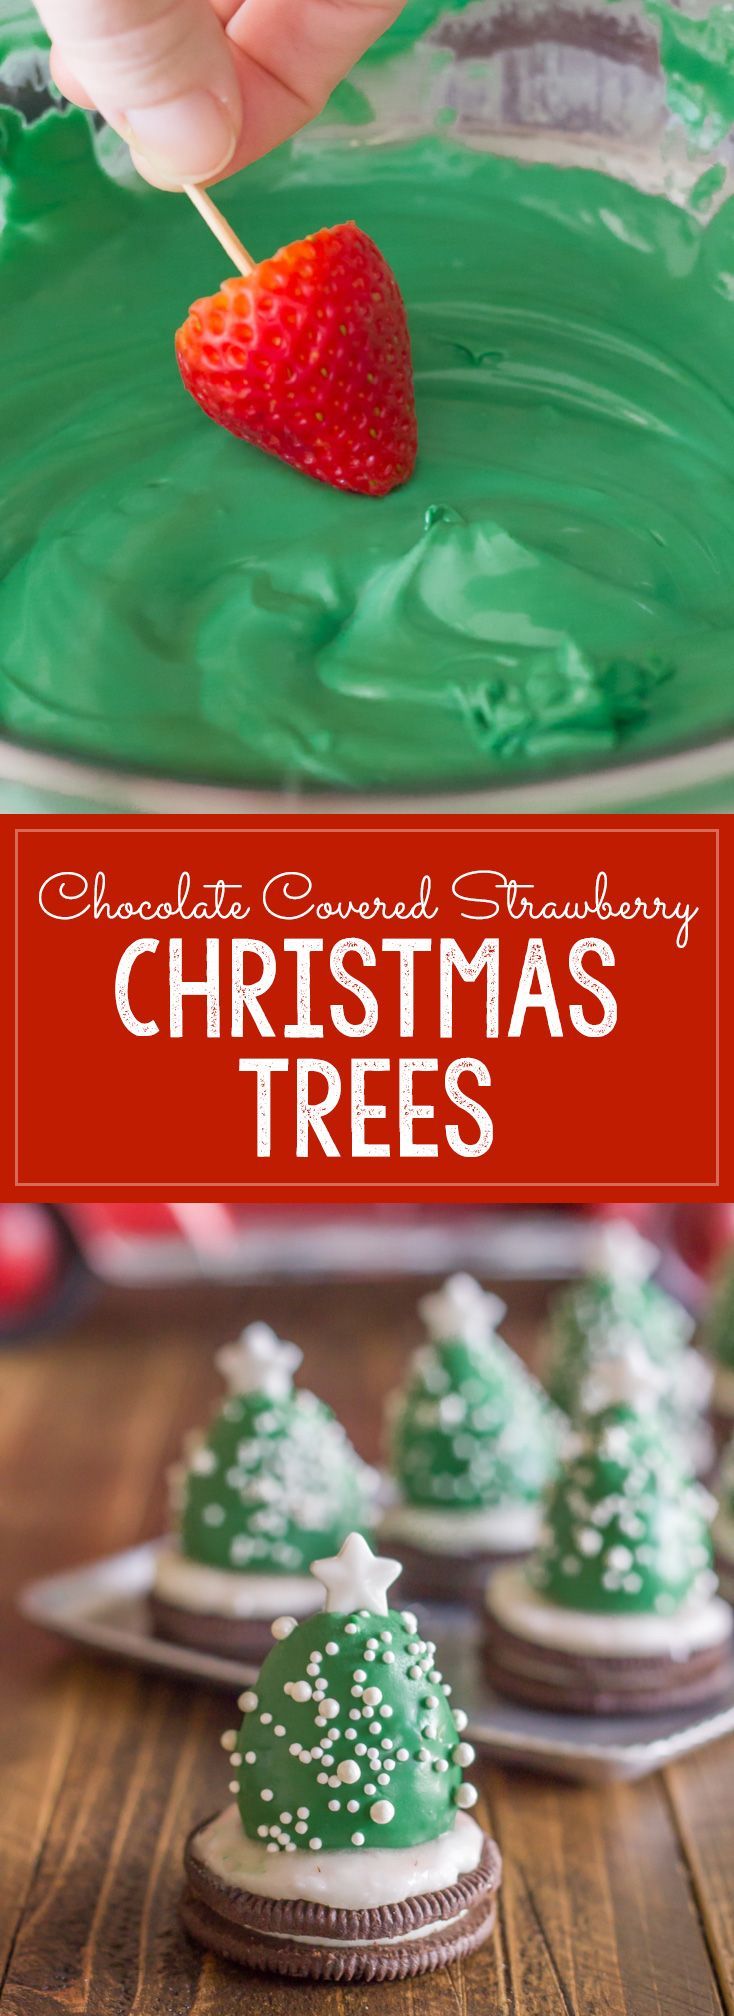 Strawberry Dipped Christmas Trees! A fun and easy Christmas project to do with your kiddos, and an adorable holiday snack! Great